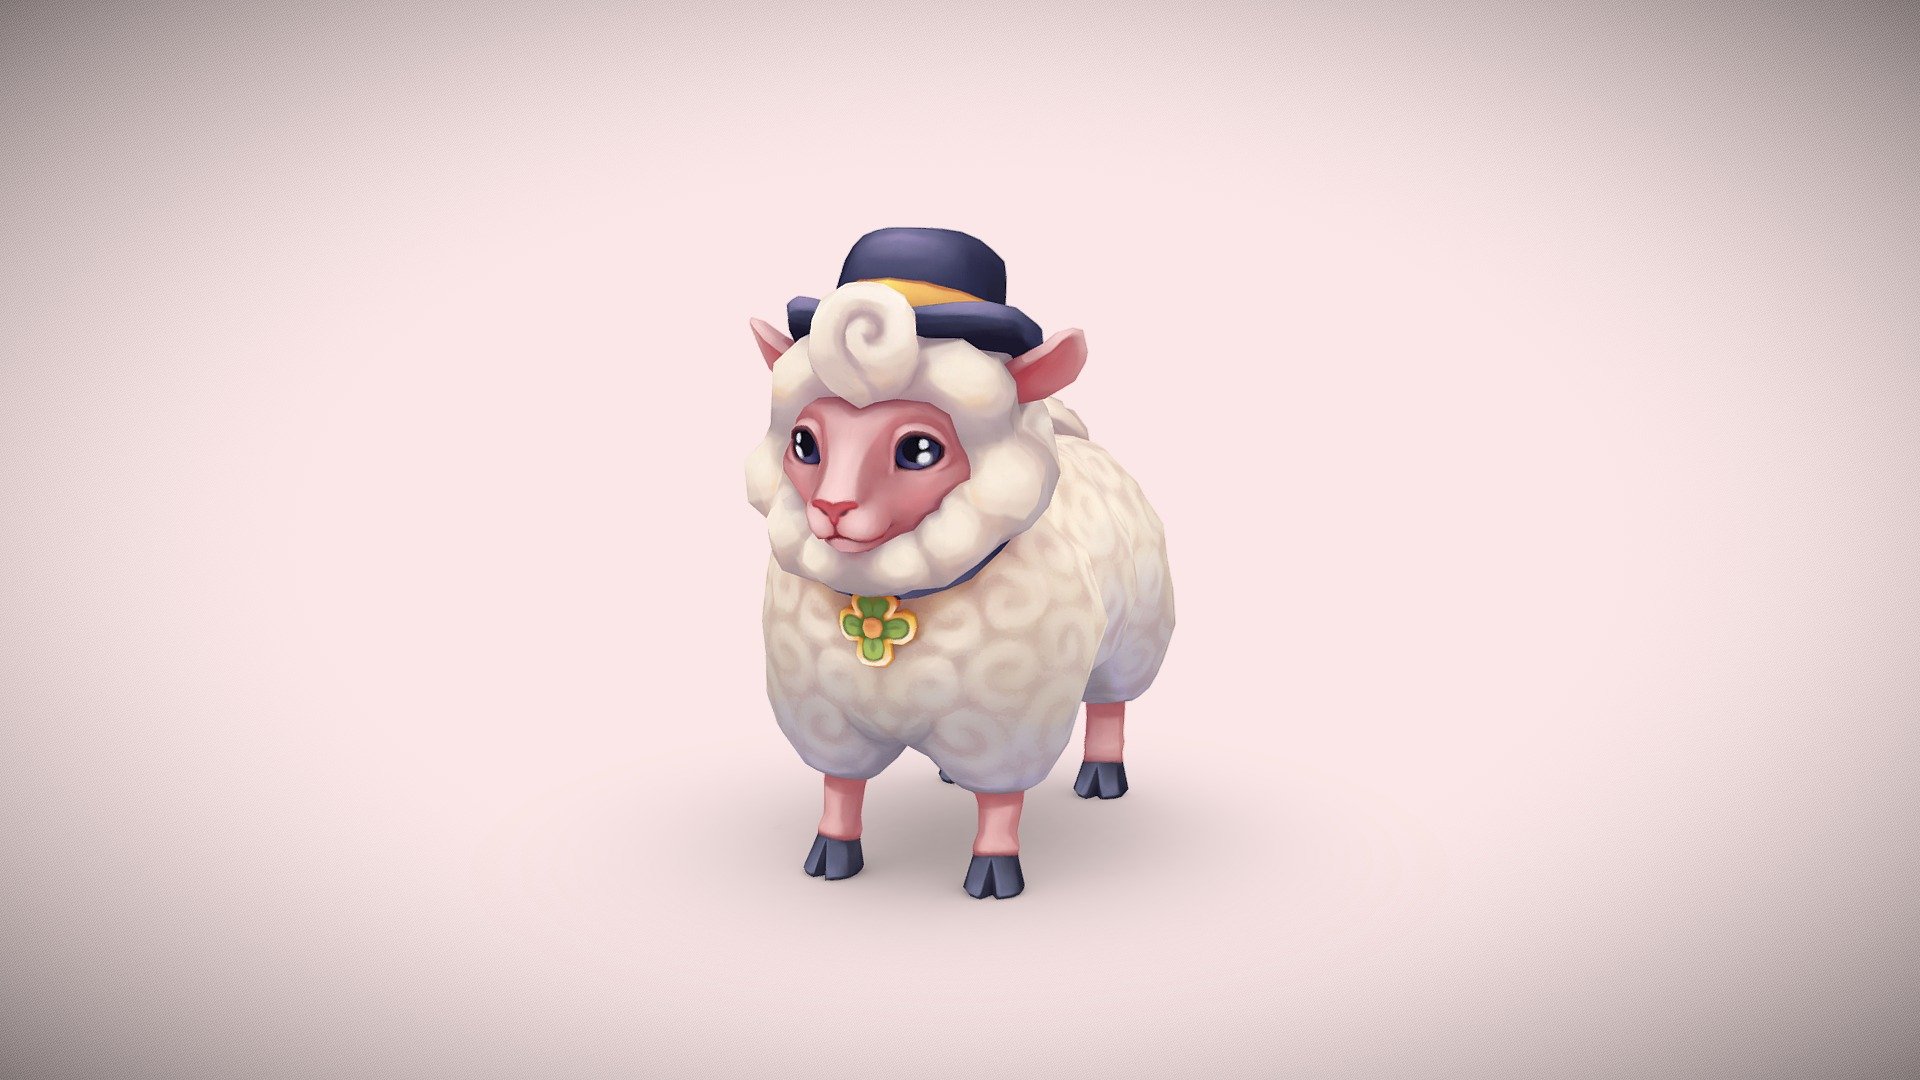 Designed for Gallery: Coloring Book &amp;amp; Decor - Sheep - 3D model by flafflypuff 3d model